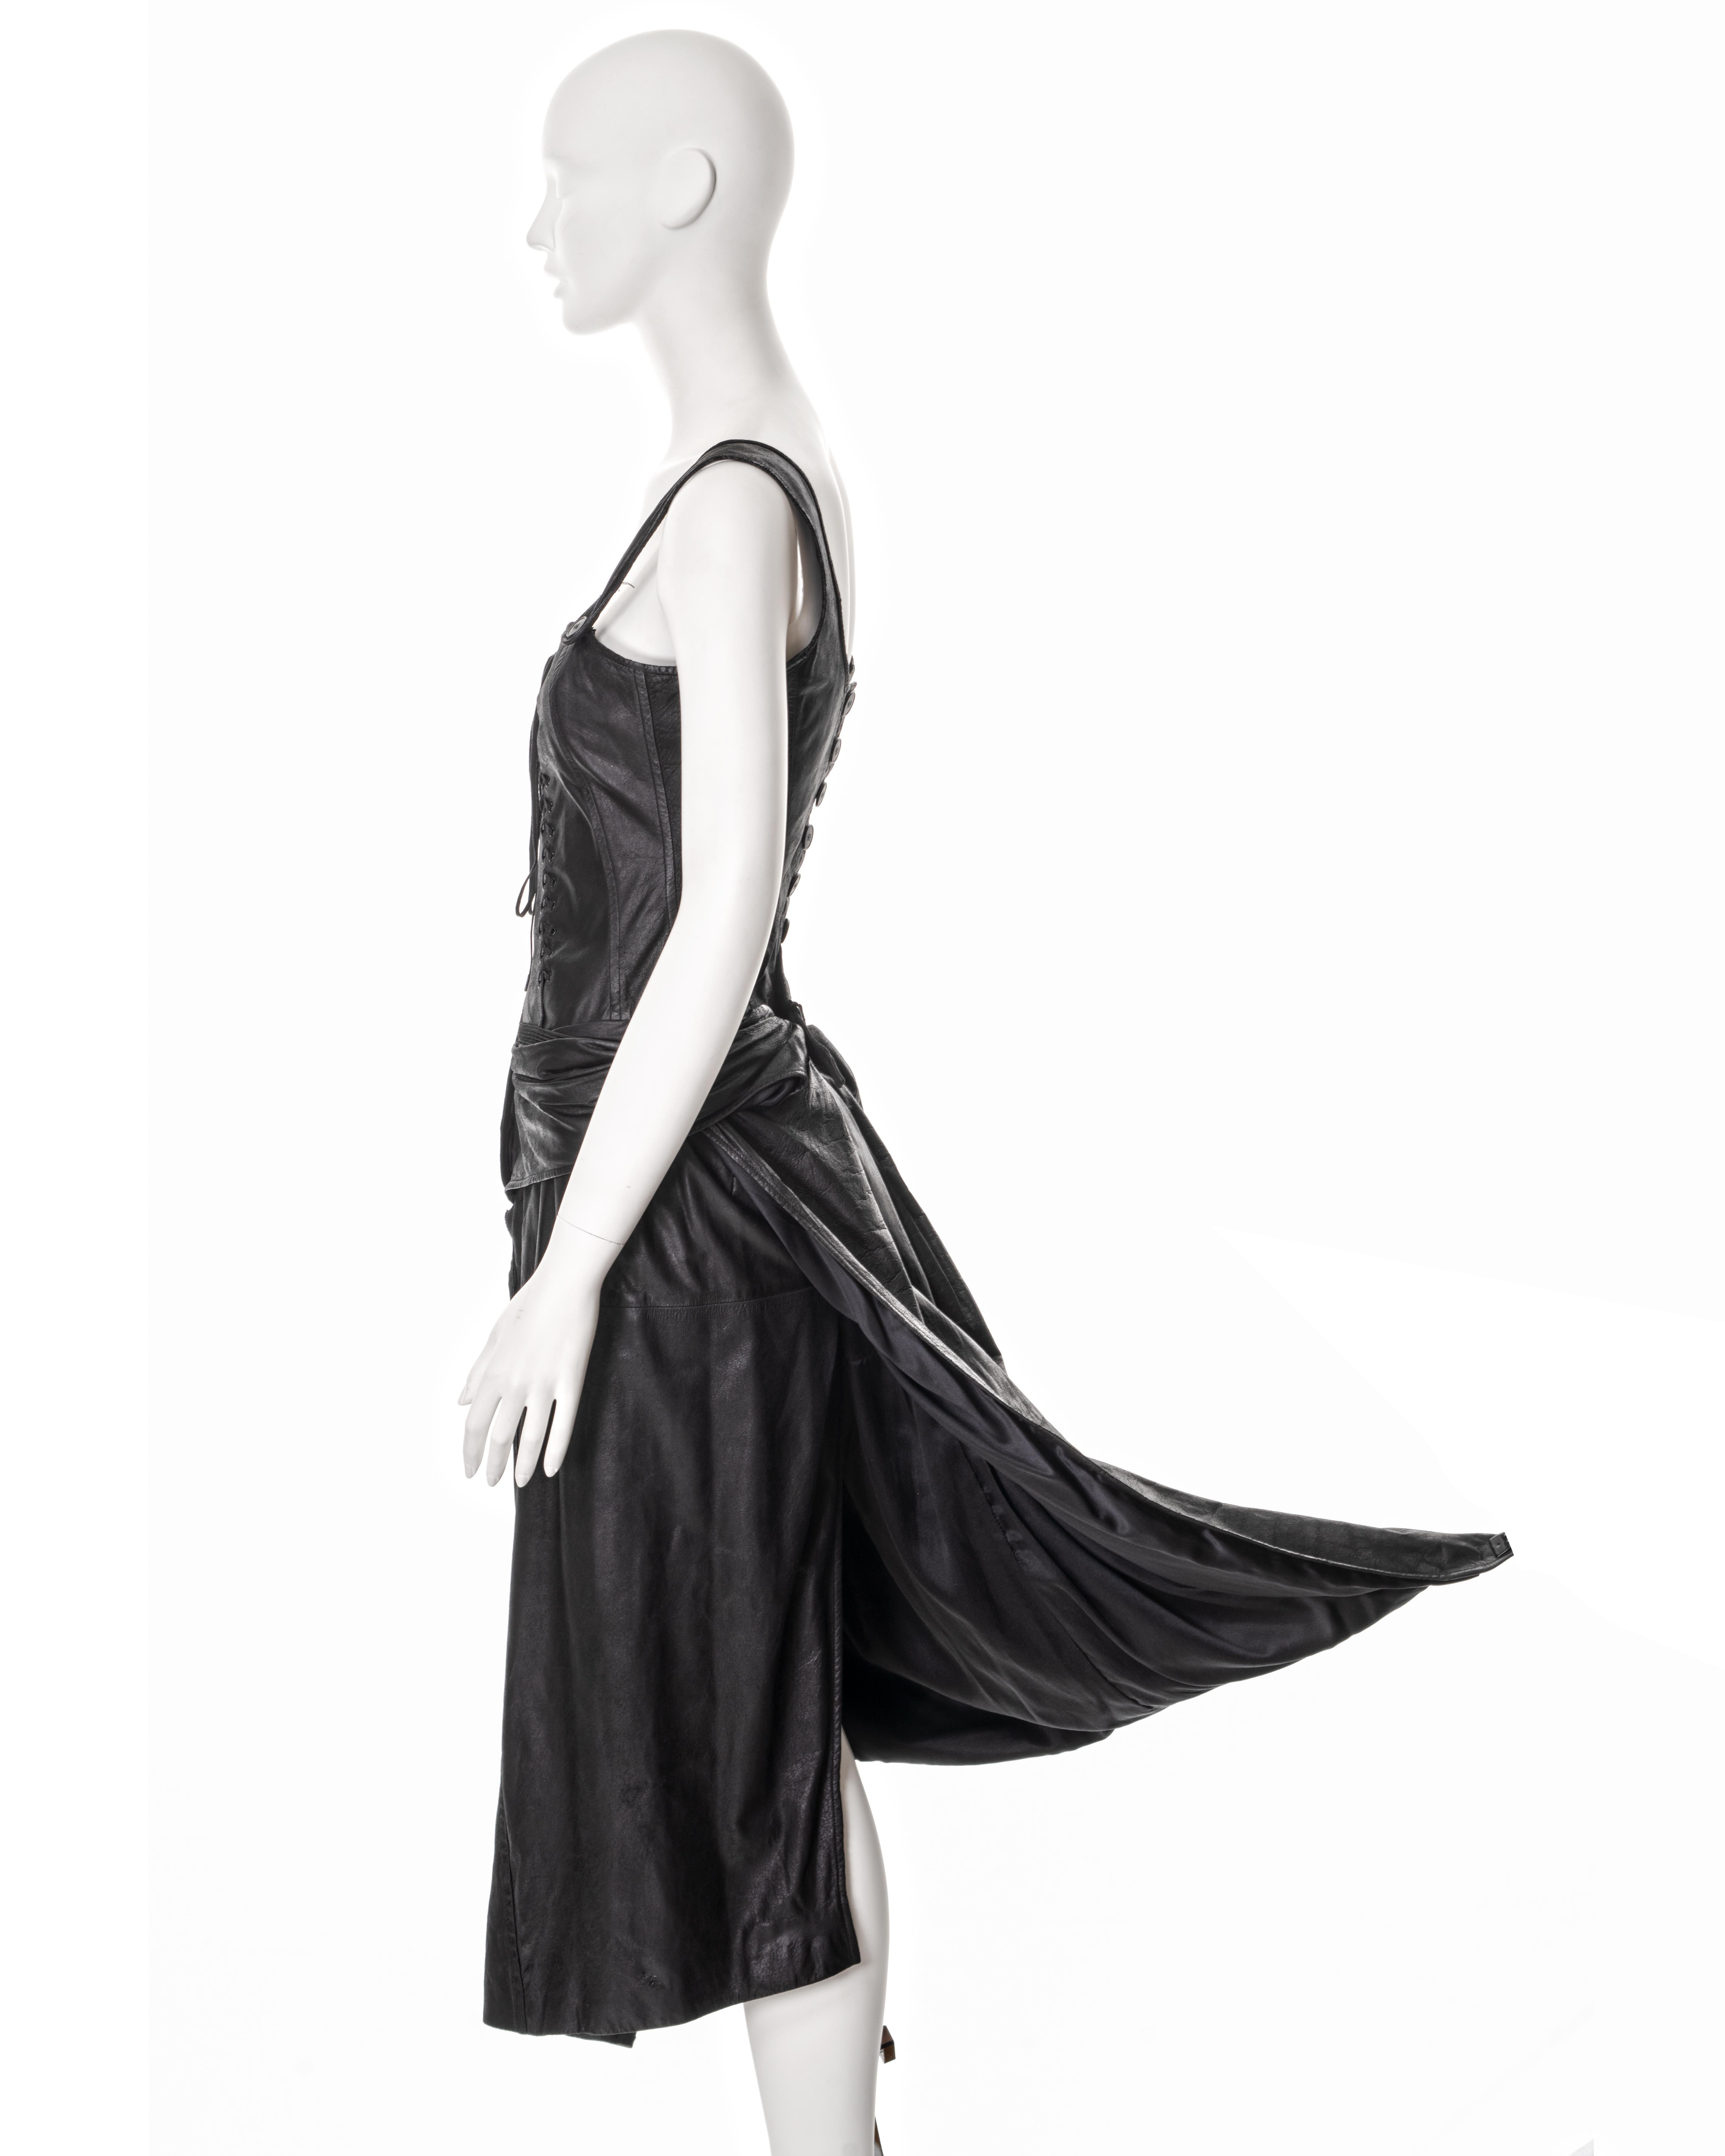 Christian Dior by John Galliano black leather deconstructed dress, ss 2000 2